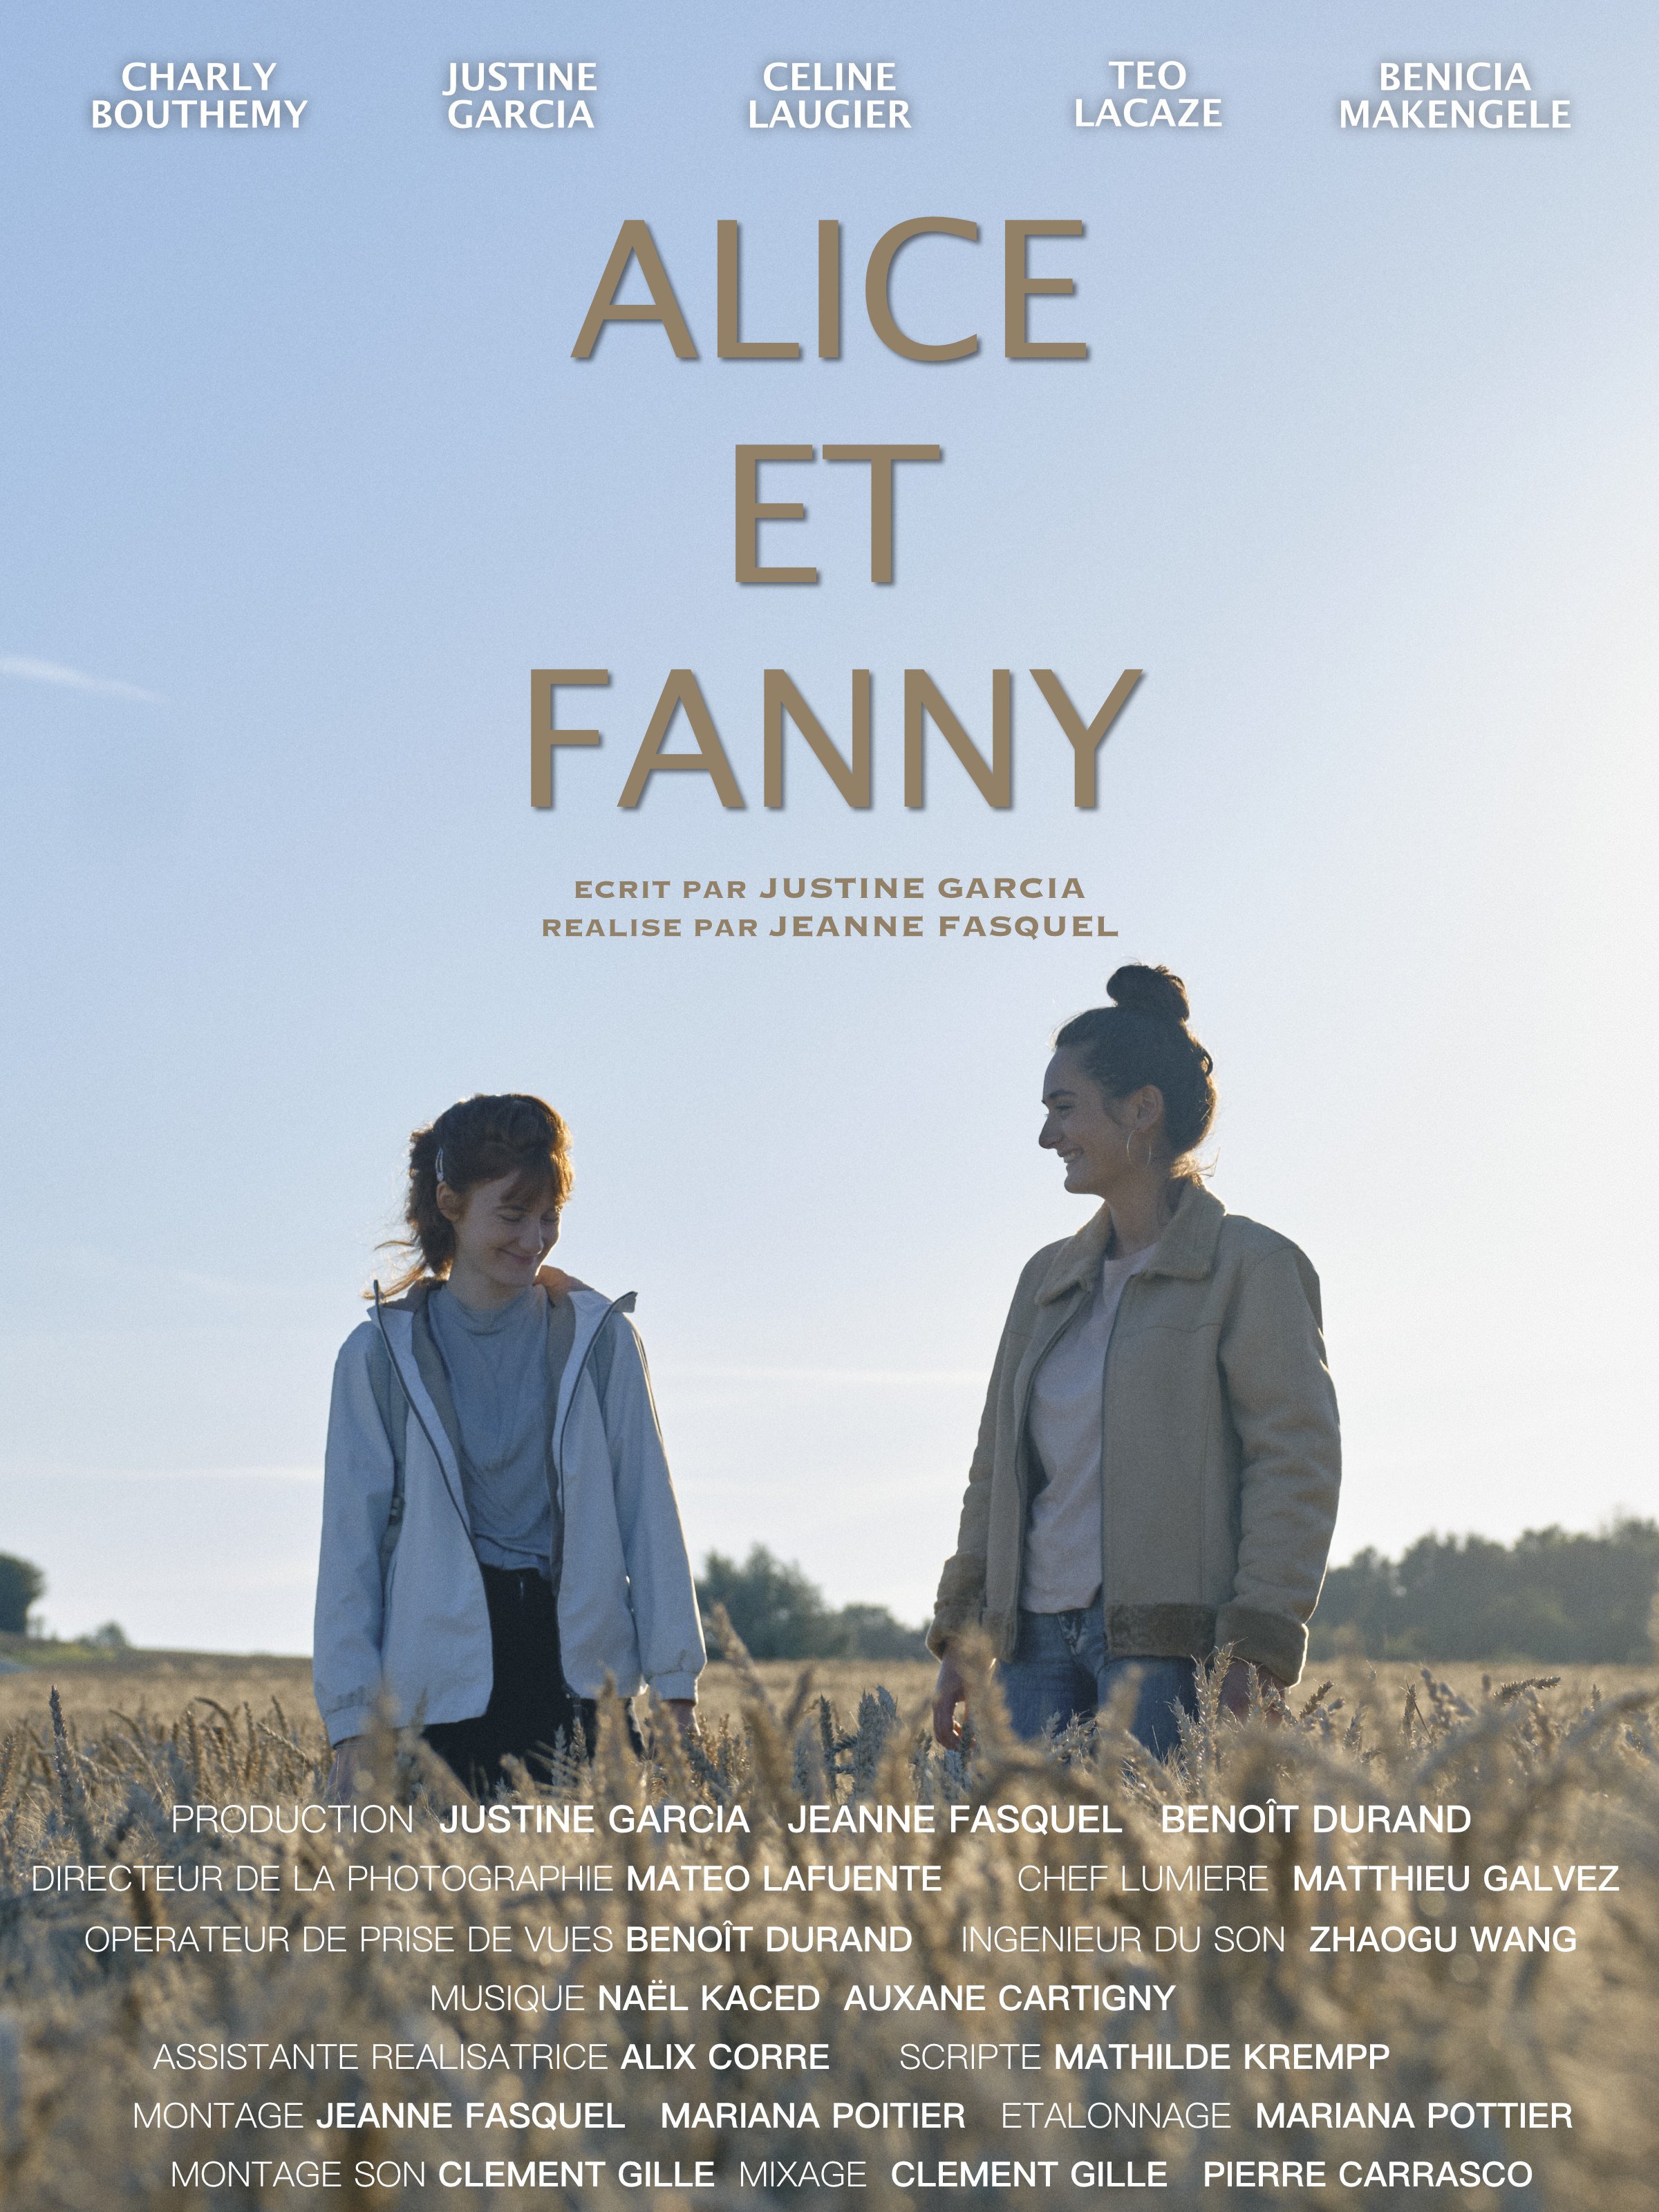 Justine Garcia - Poster Alice and Fanny.jpg